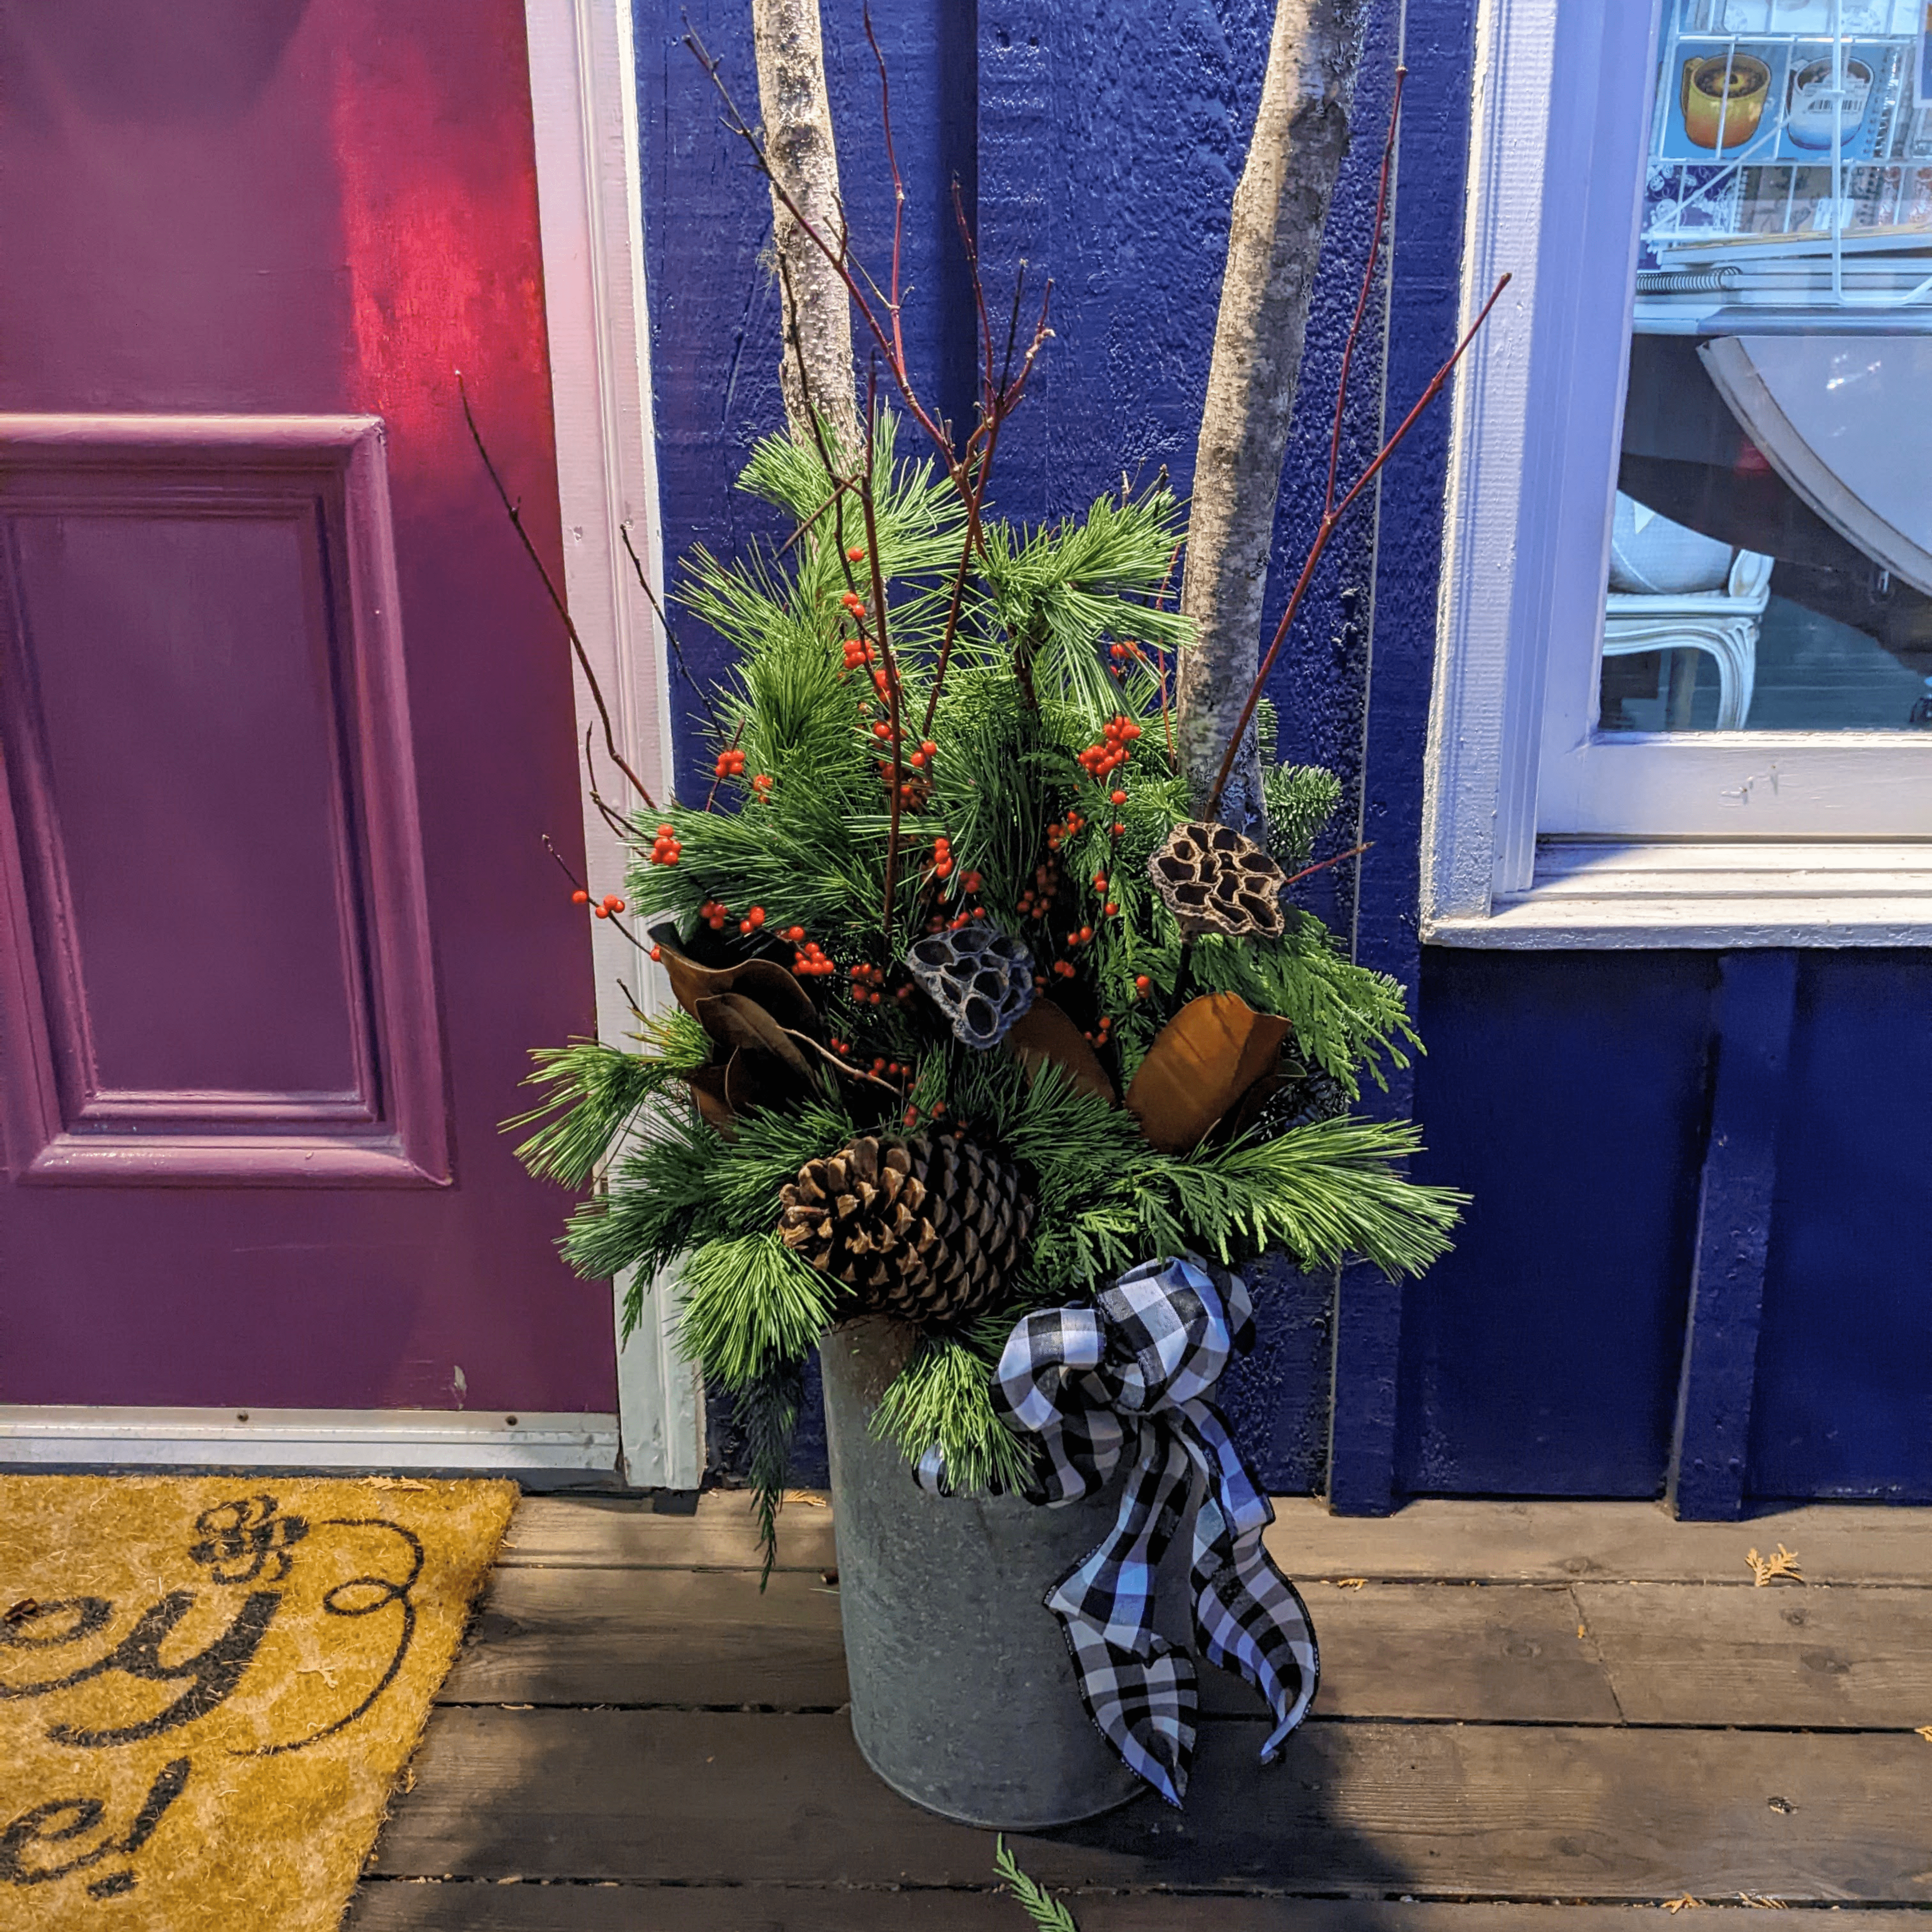 Winter Planter designed in a vintage metal sap bucket filled with a mix of greenery, fresh red berries, pine cones, magnolia leaves, red dog wood and birch sticks sitting in front of a purple door and blue wall book shop.